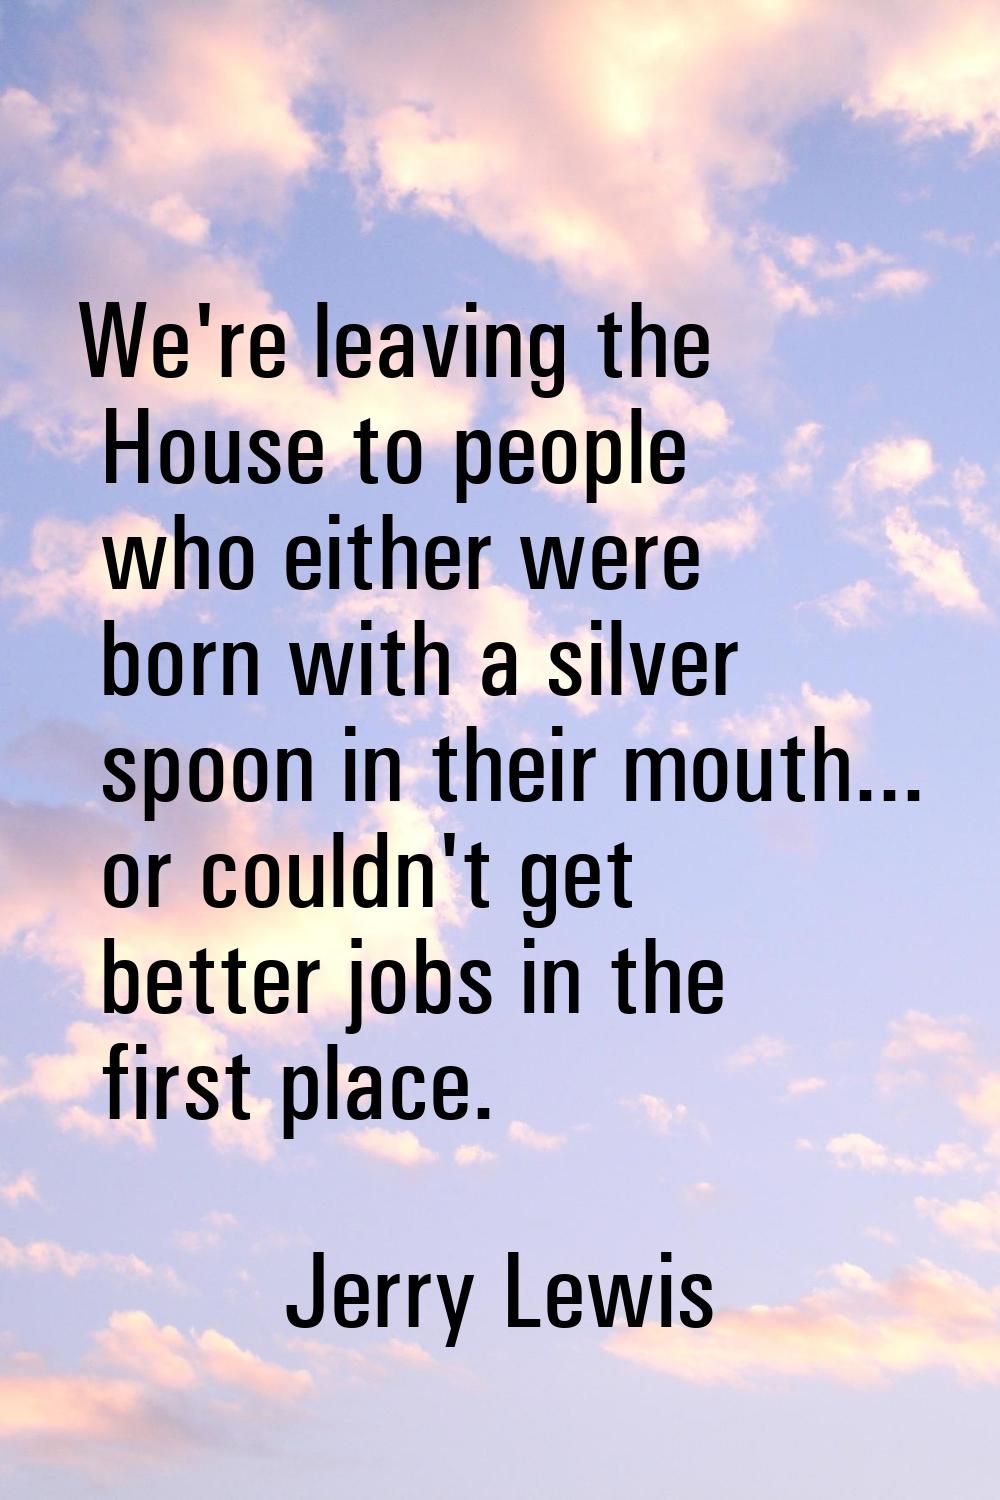 We're leaving the House to people who either were born with a silver spoon in their mouth... or cou